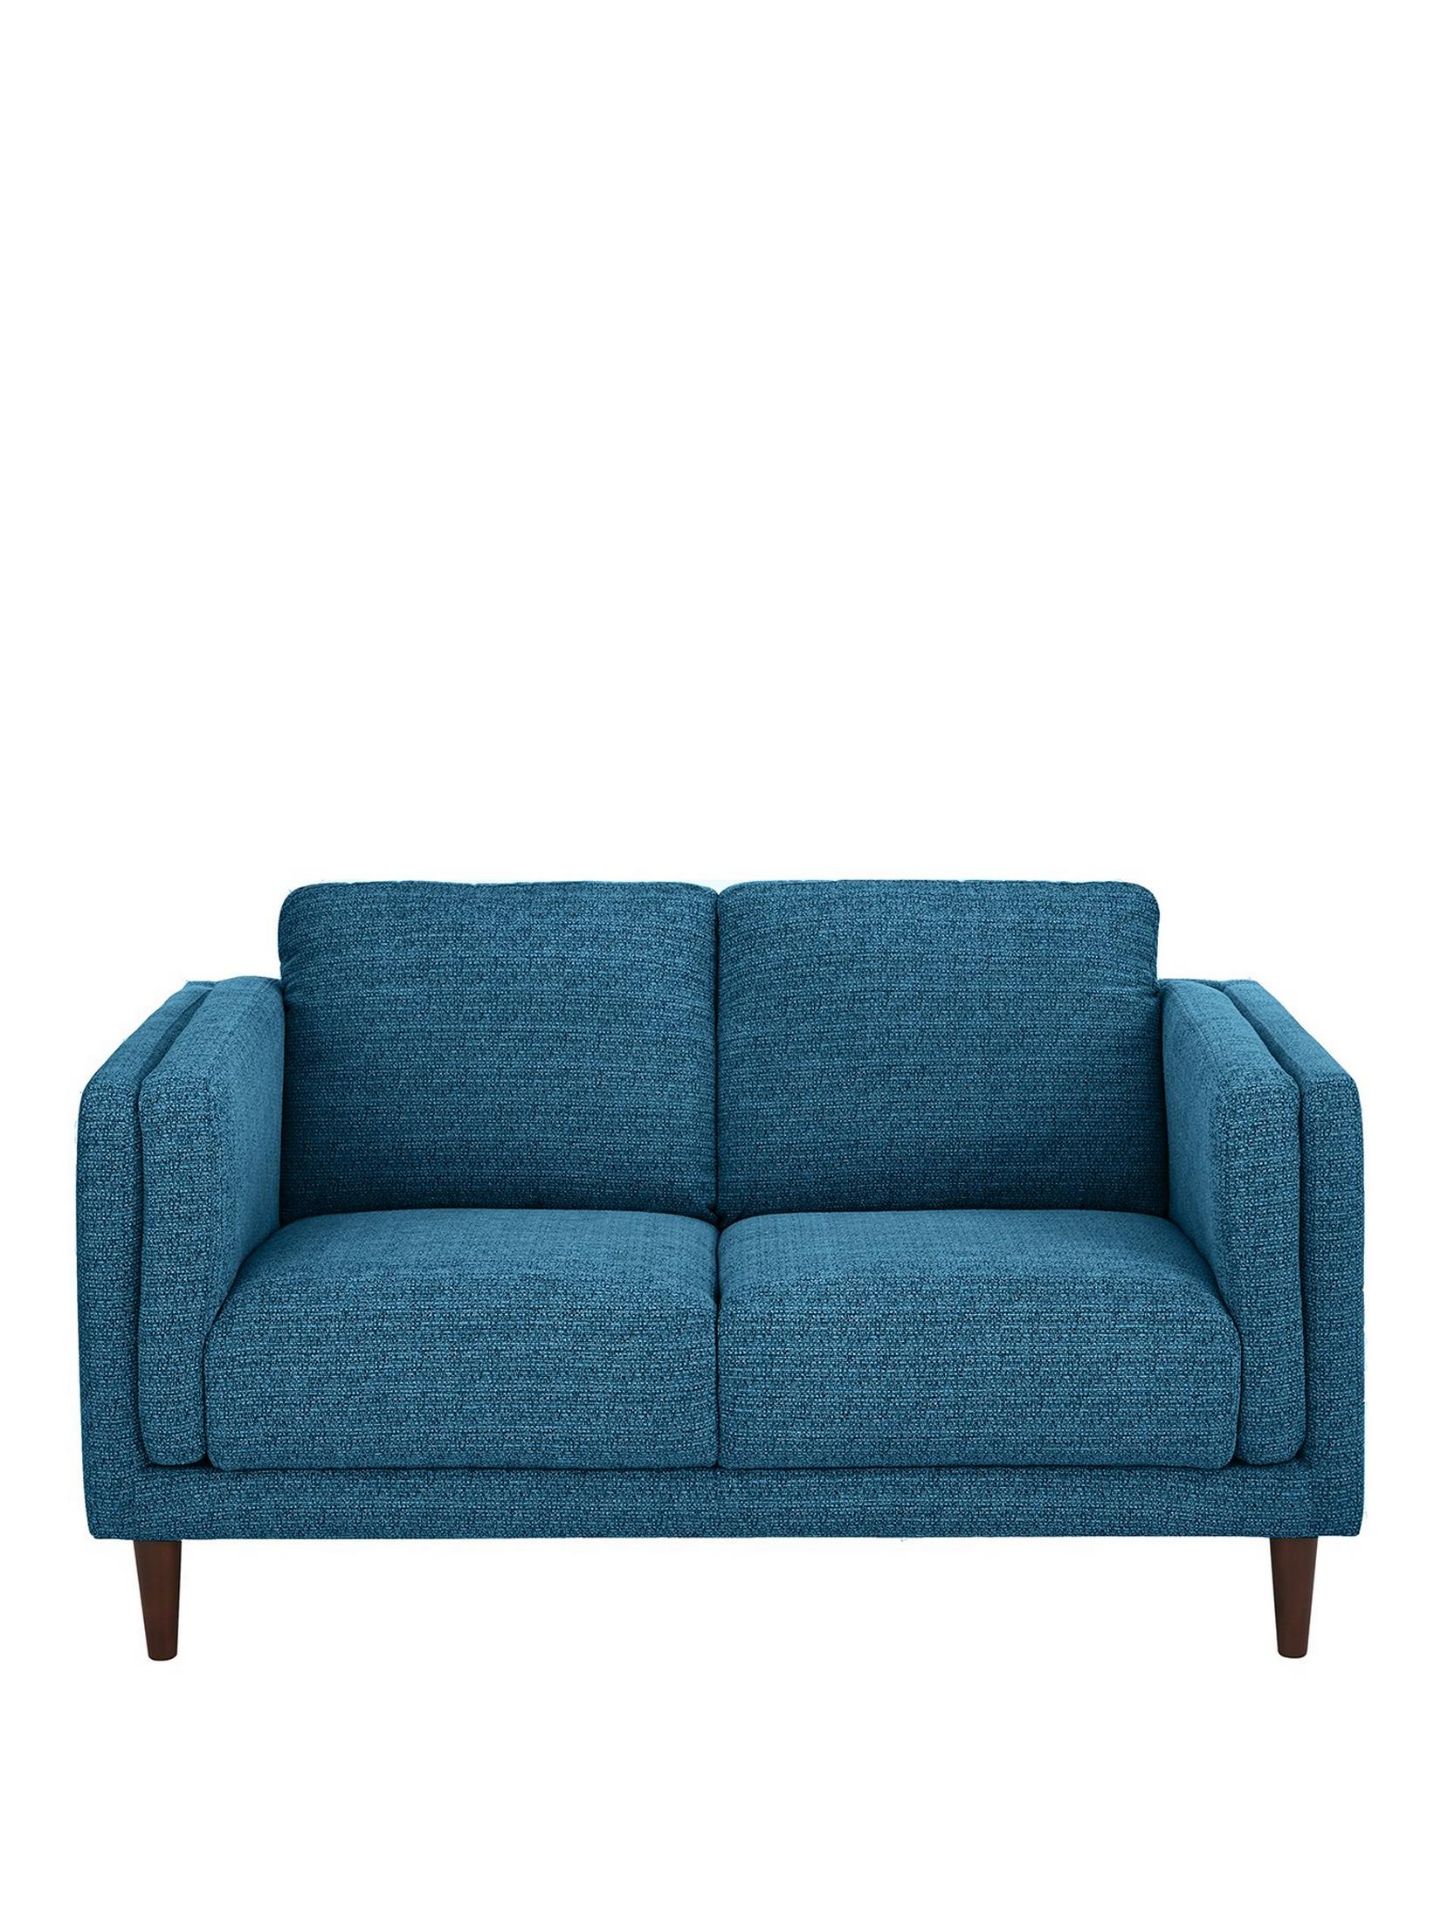 Ava 2 Seater Sofa. RPP £799.00. H 85 x W 154 x D 90 cm Modern design Ava is upholstered in a rich - Image 3 of 3